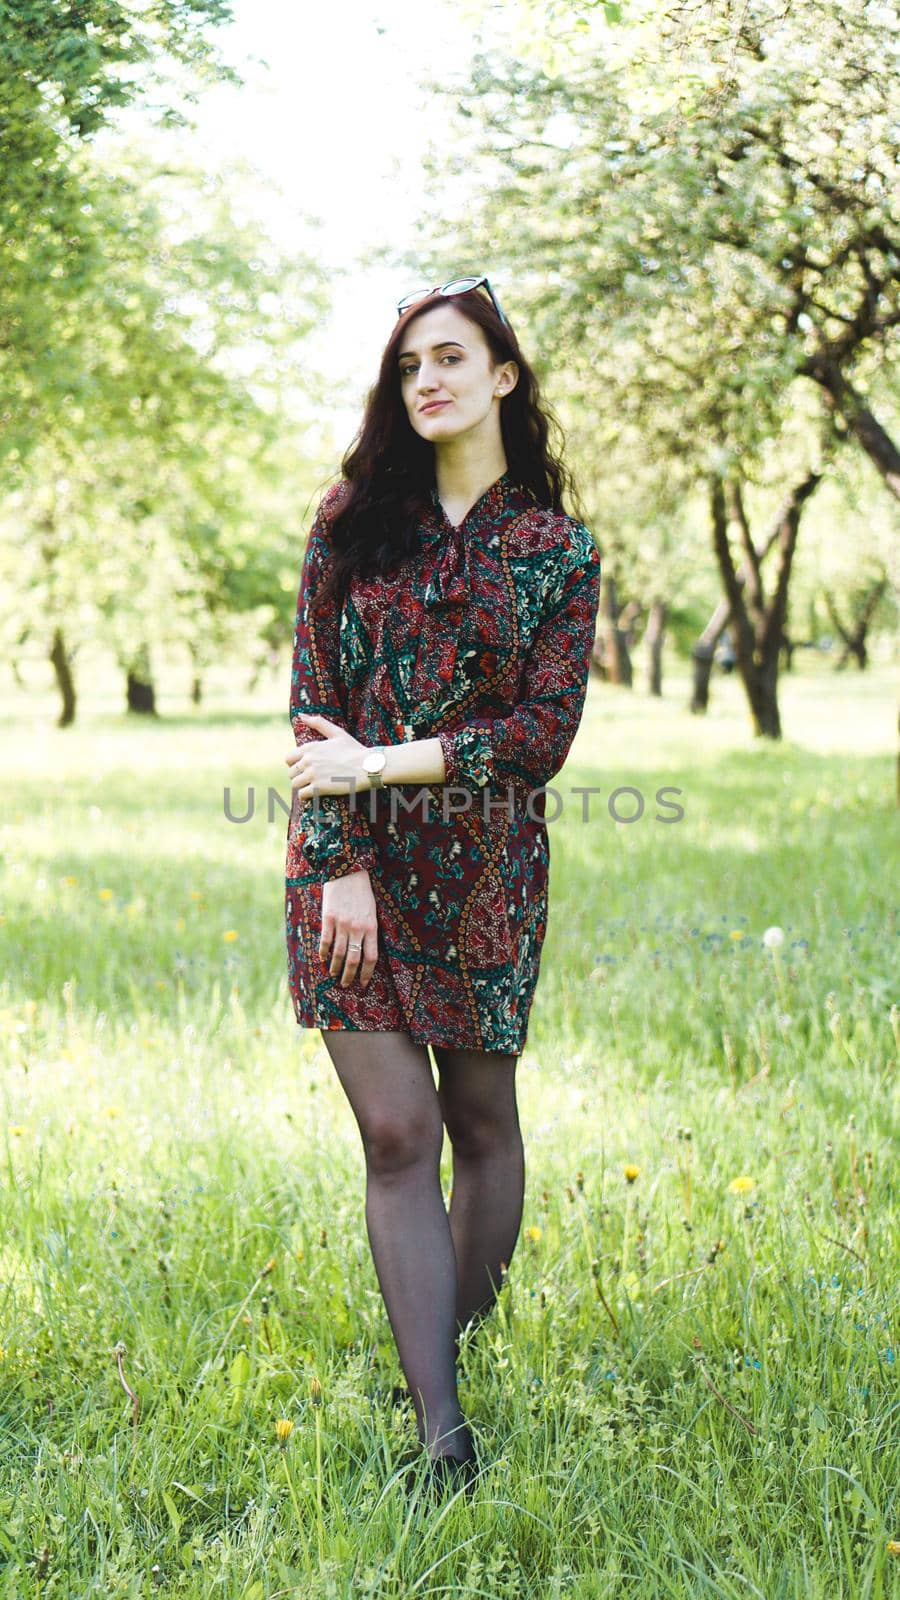 Beautiful Young Woman Outdoor. Enjoy Nature. Healthy Smiling Girl in Park by natali_brill